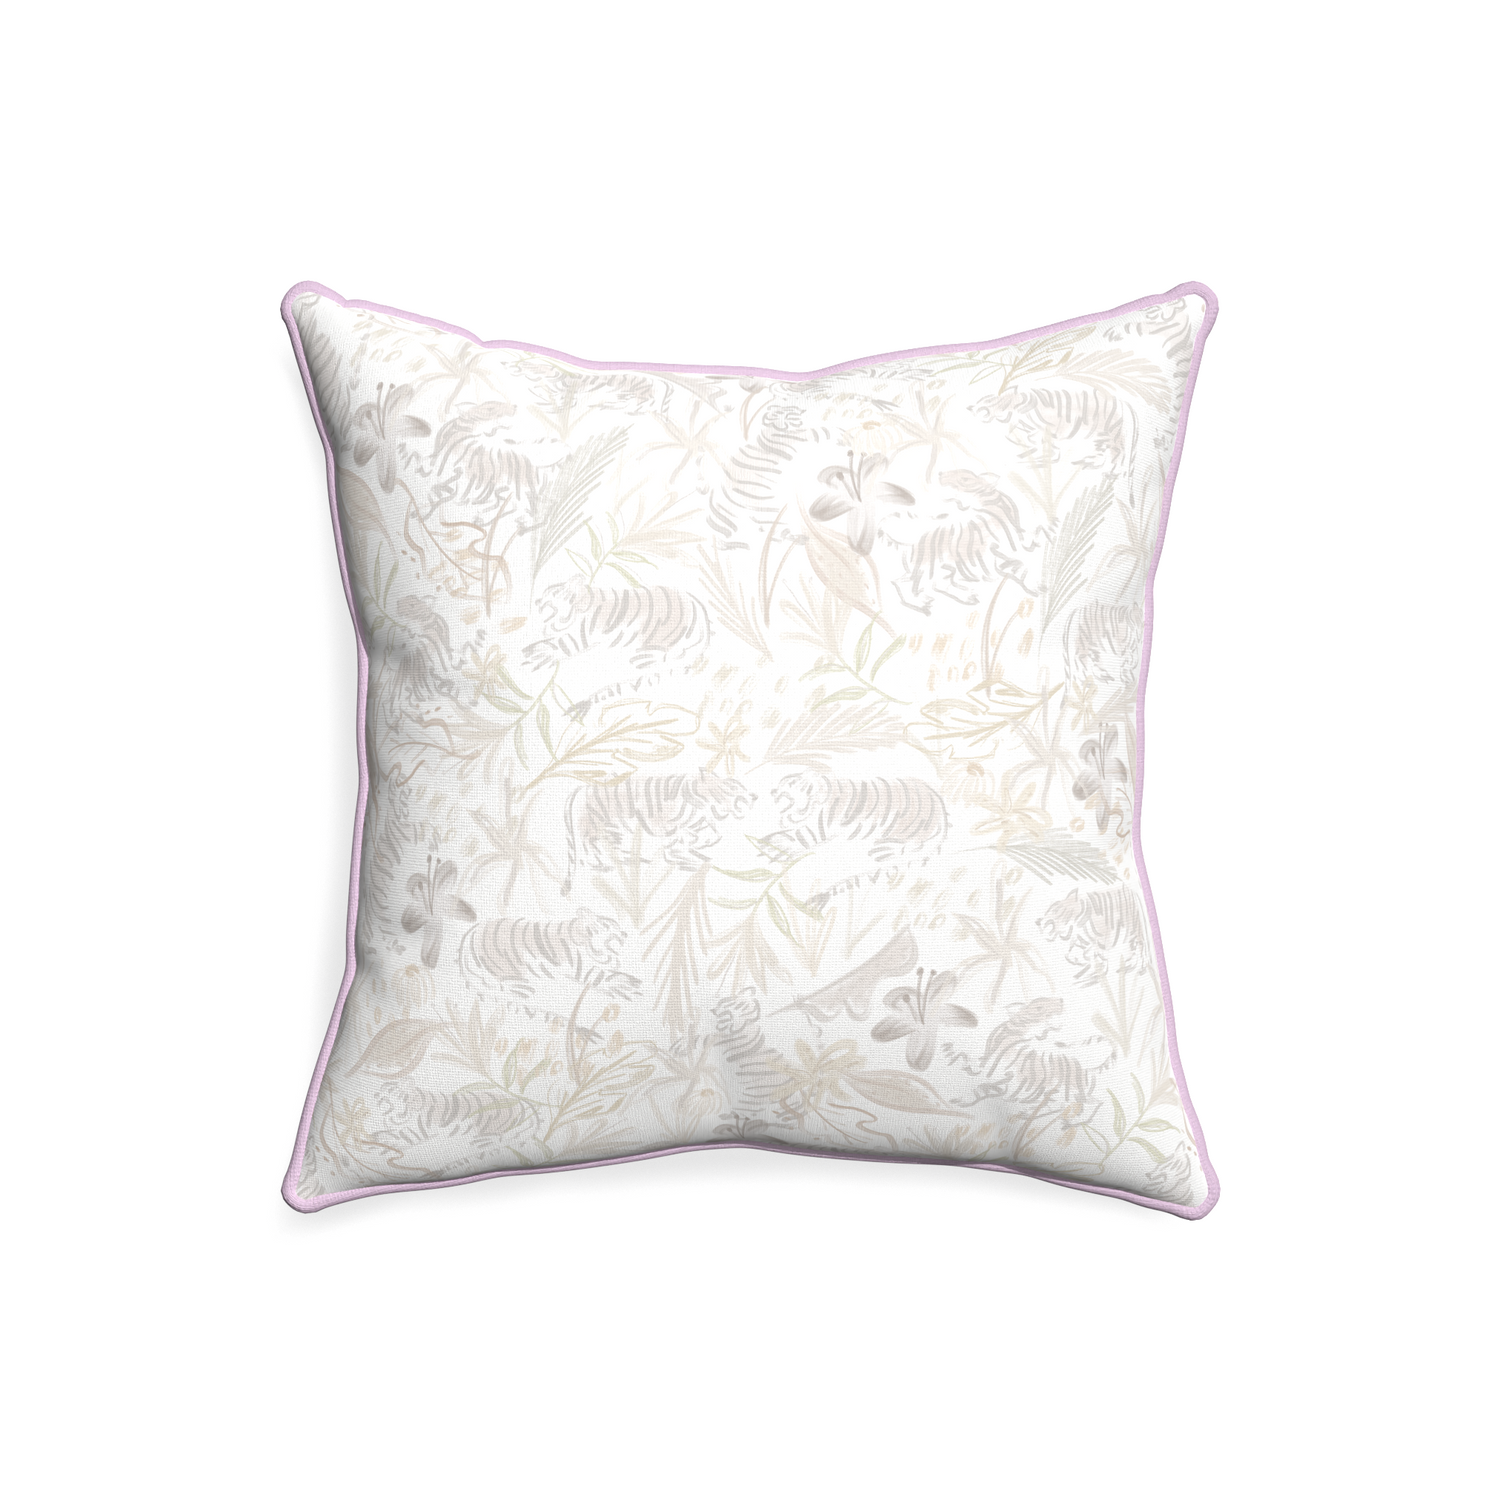 20-square frida sand custom pillow with l piping on white background